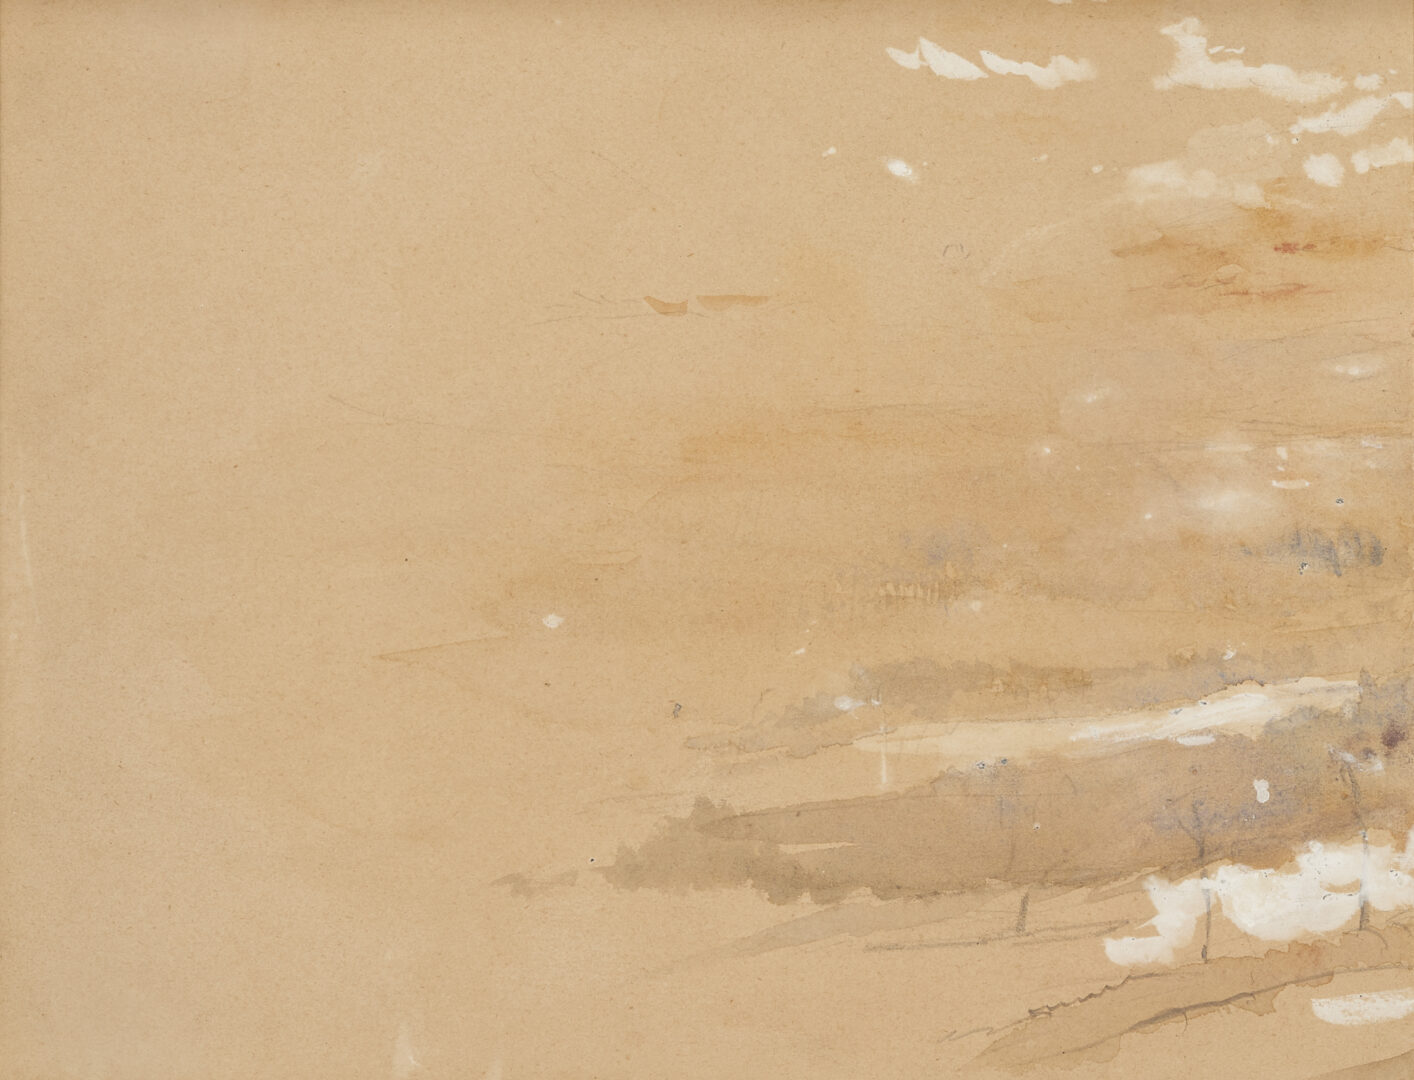 Lot 704: Stanford White W/C Landscape Painting, "Valley of the Seine"